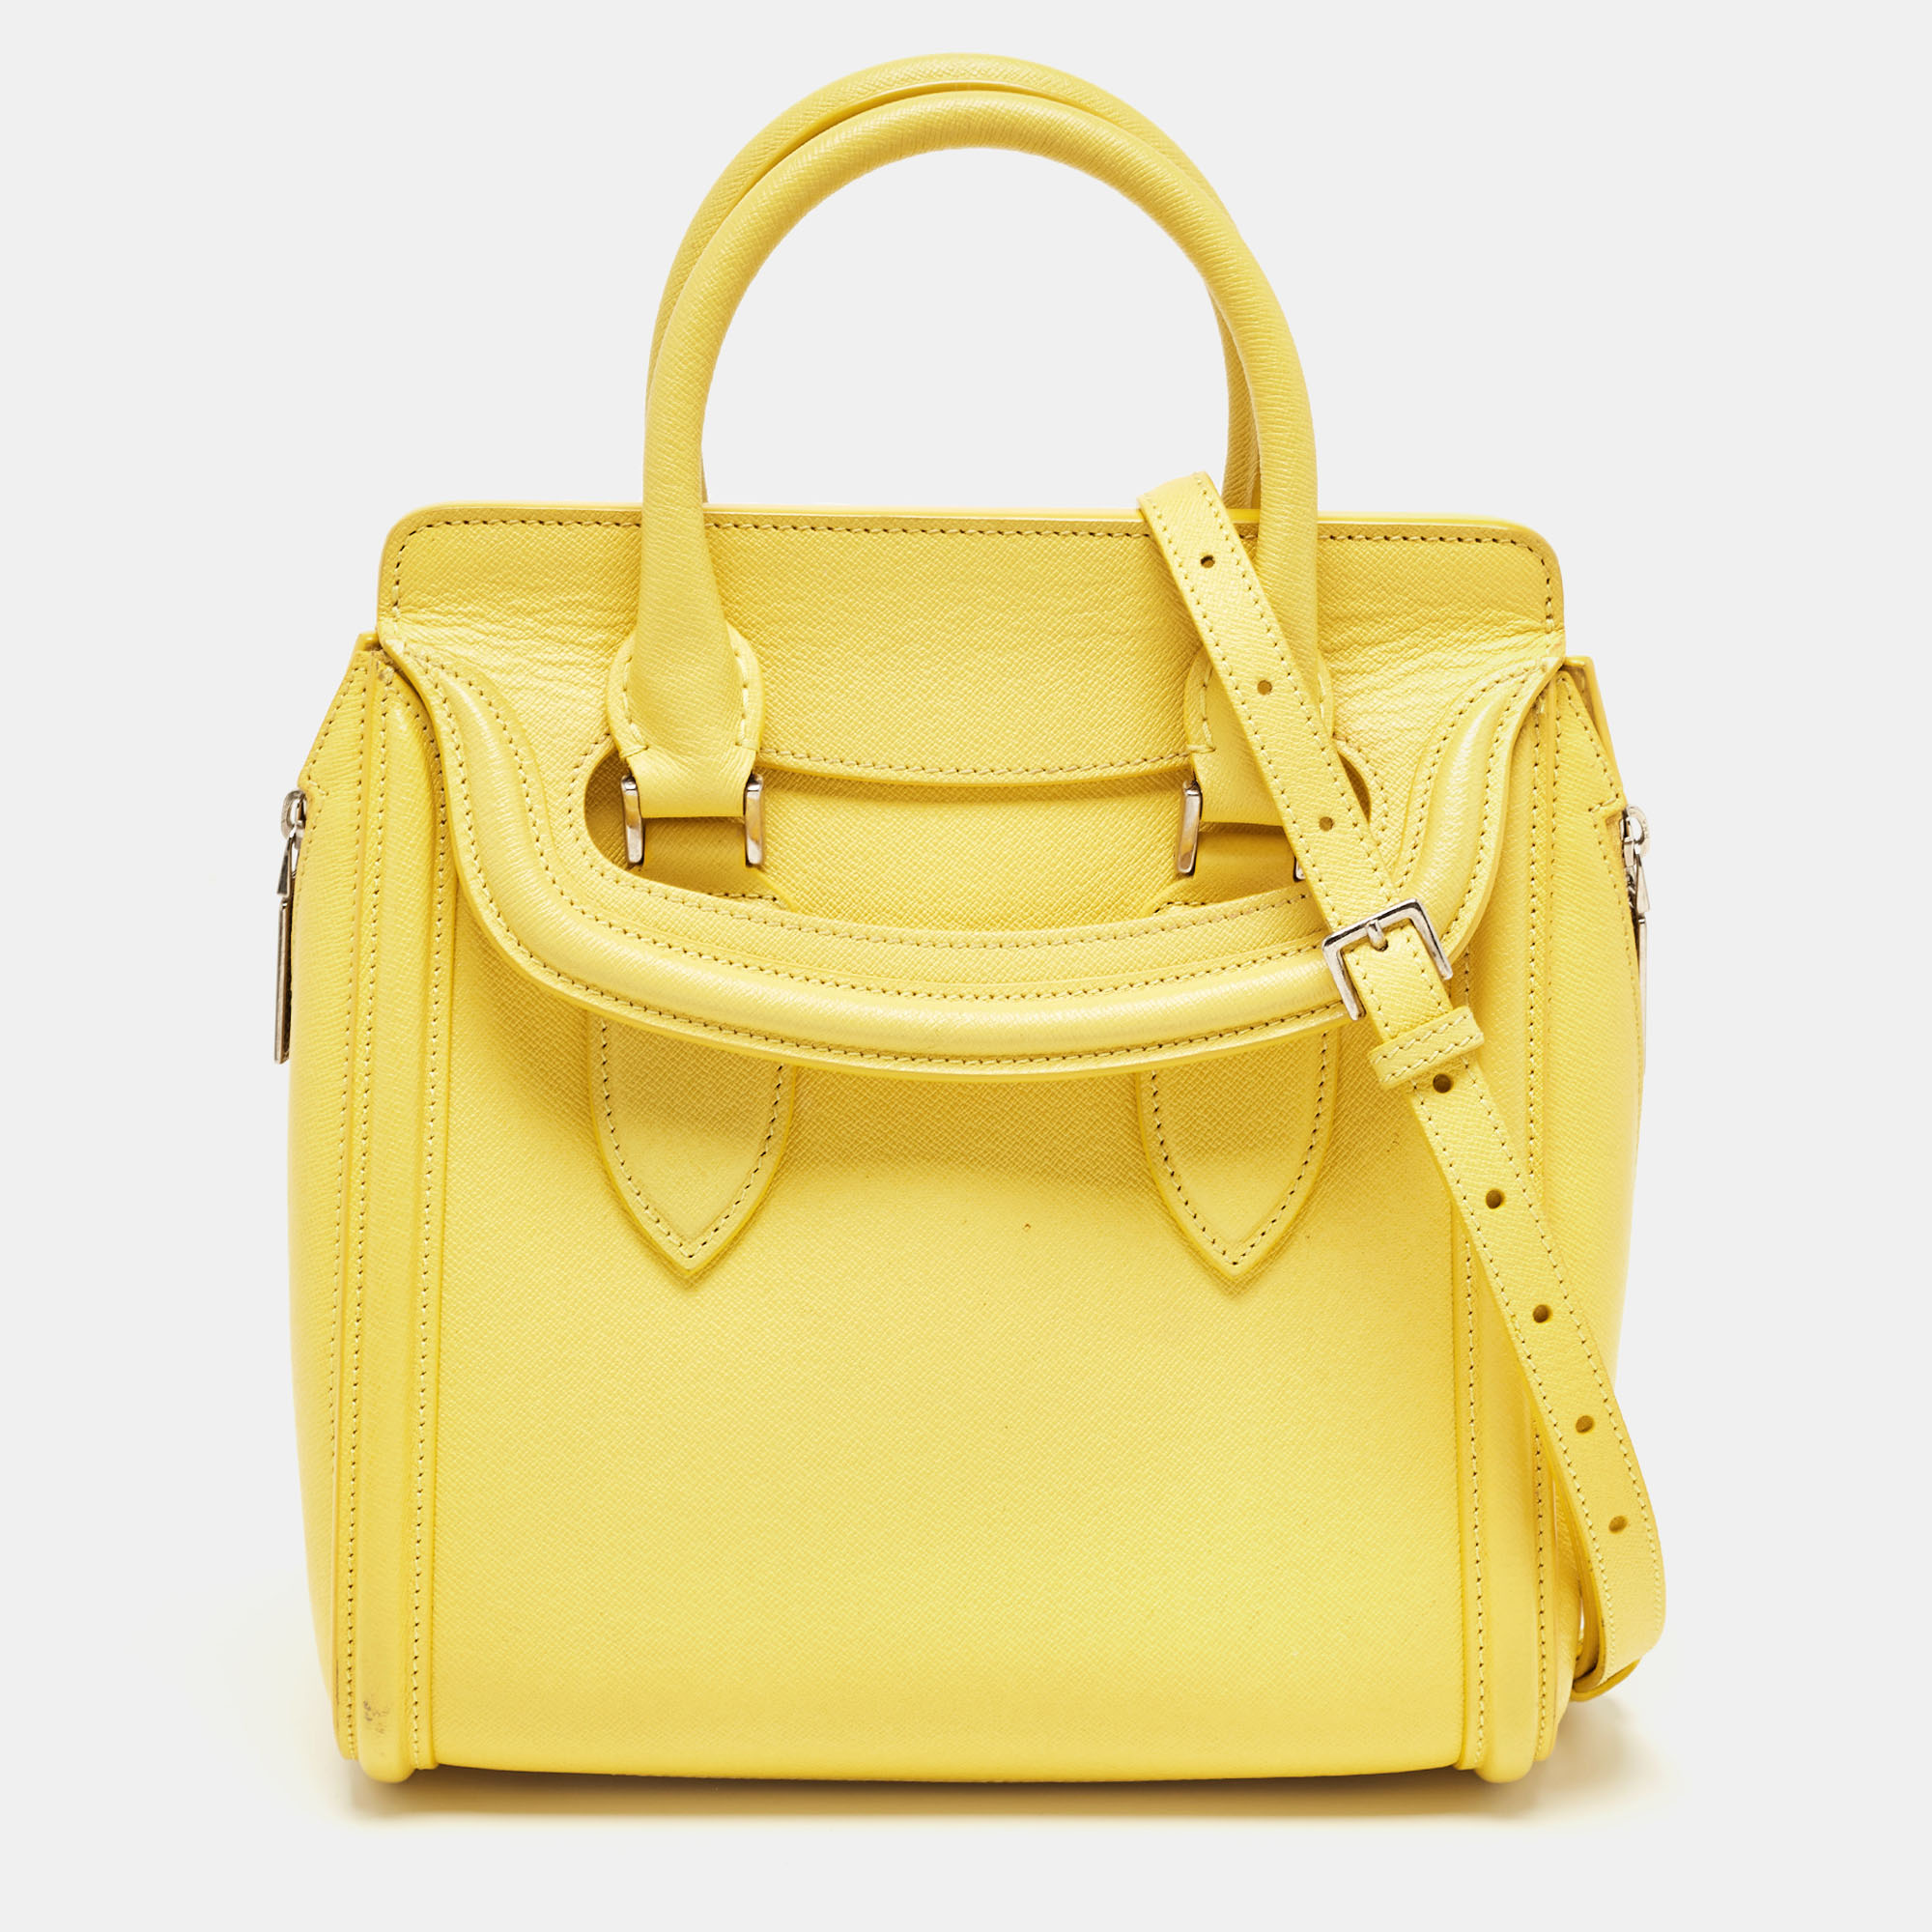 Pre-owned Alexander Mcqueen Yellow Leather Small Heroine Satchel